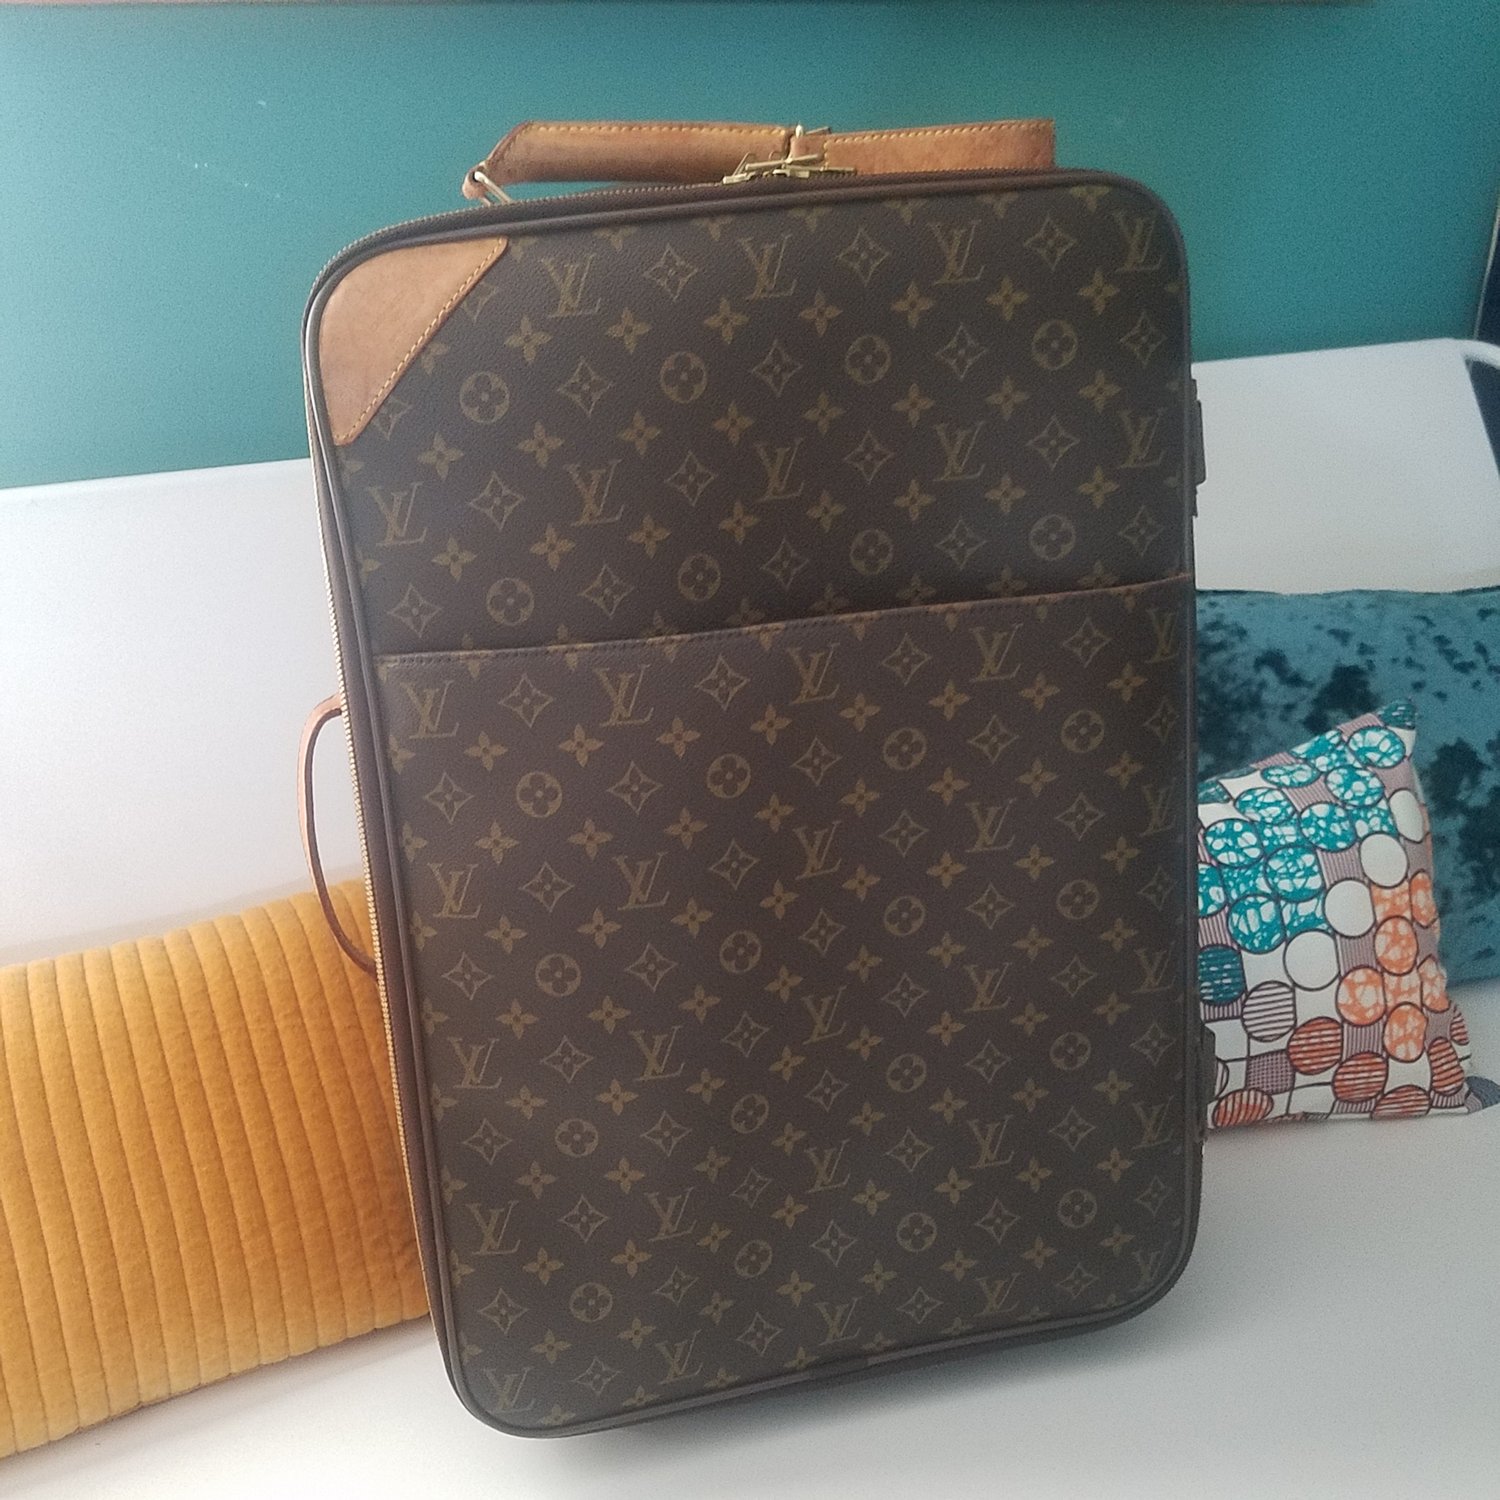 Louis Vuitton Monogram Pegase 55 Rolling Luggage at Jill's Consignment